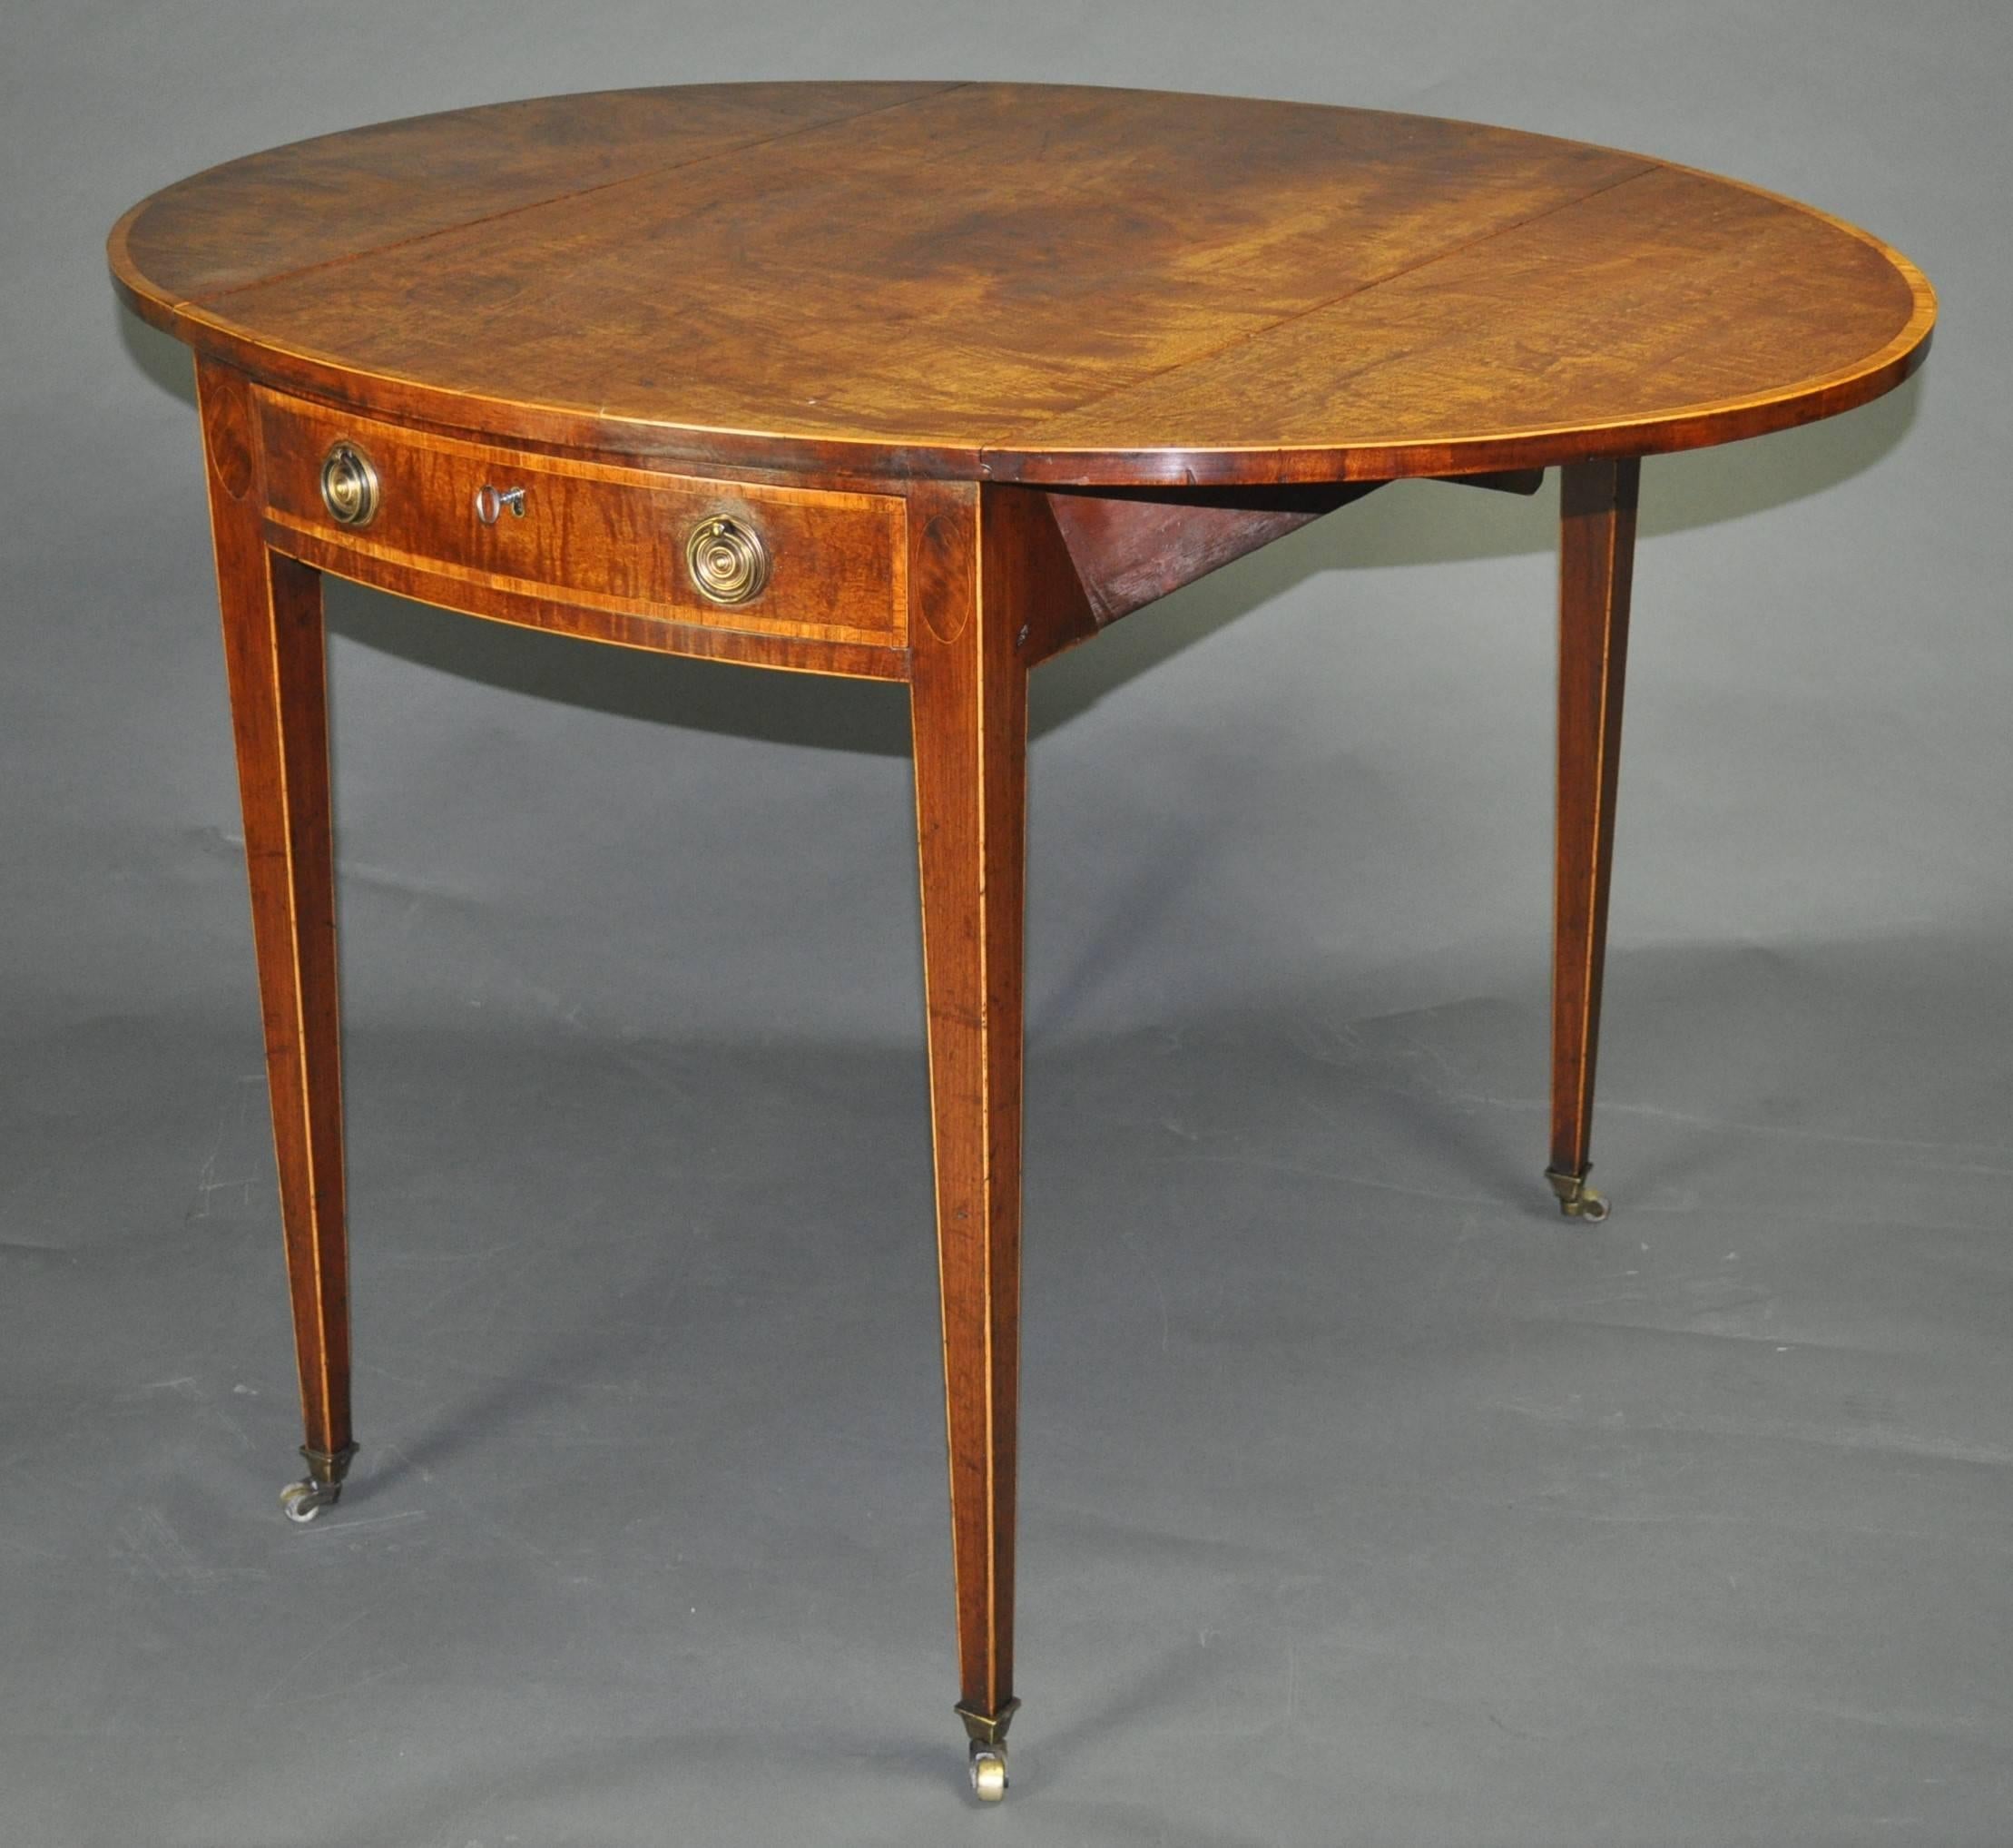 A good quality late 18th century figured mahogany oval Pembroke table, the top with lively figuring and good color, crossbanded in tulipwood, above a plain apron with similarly banded drawer and dummy drawer, standing on elegant square tapering legs